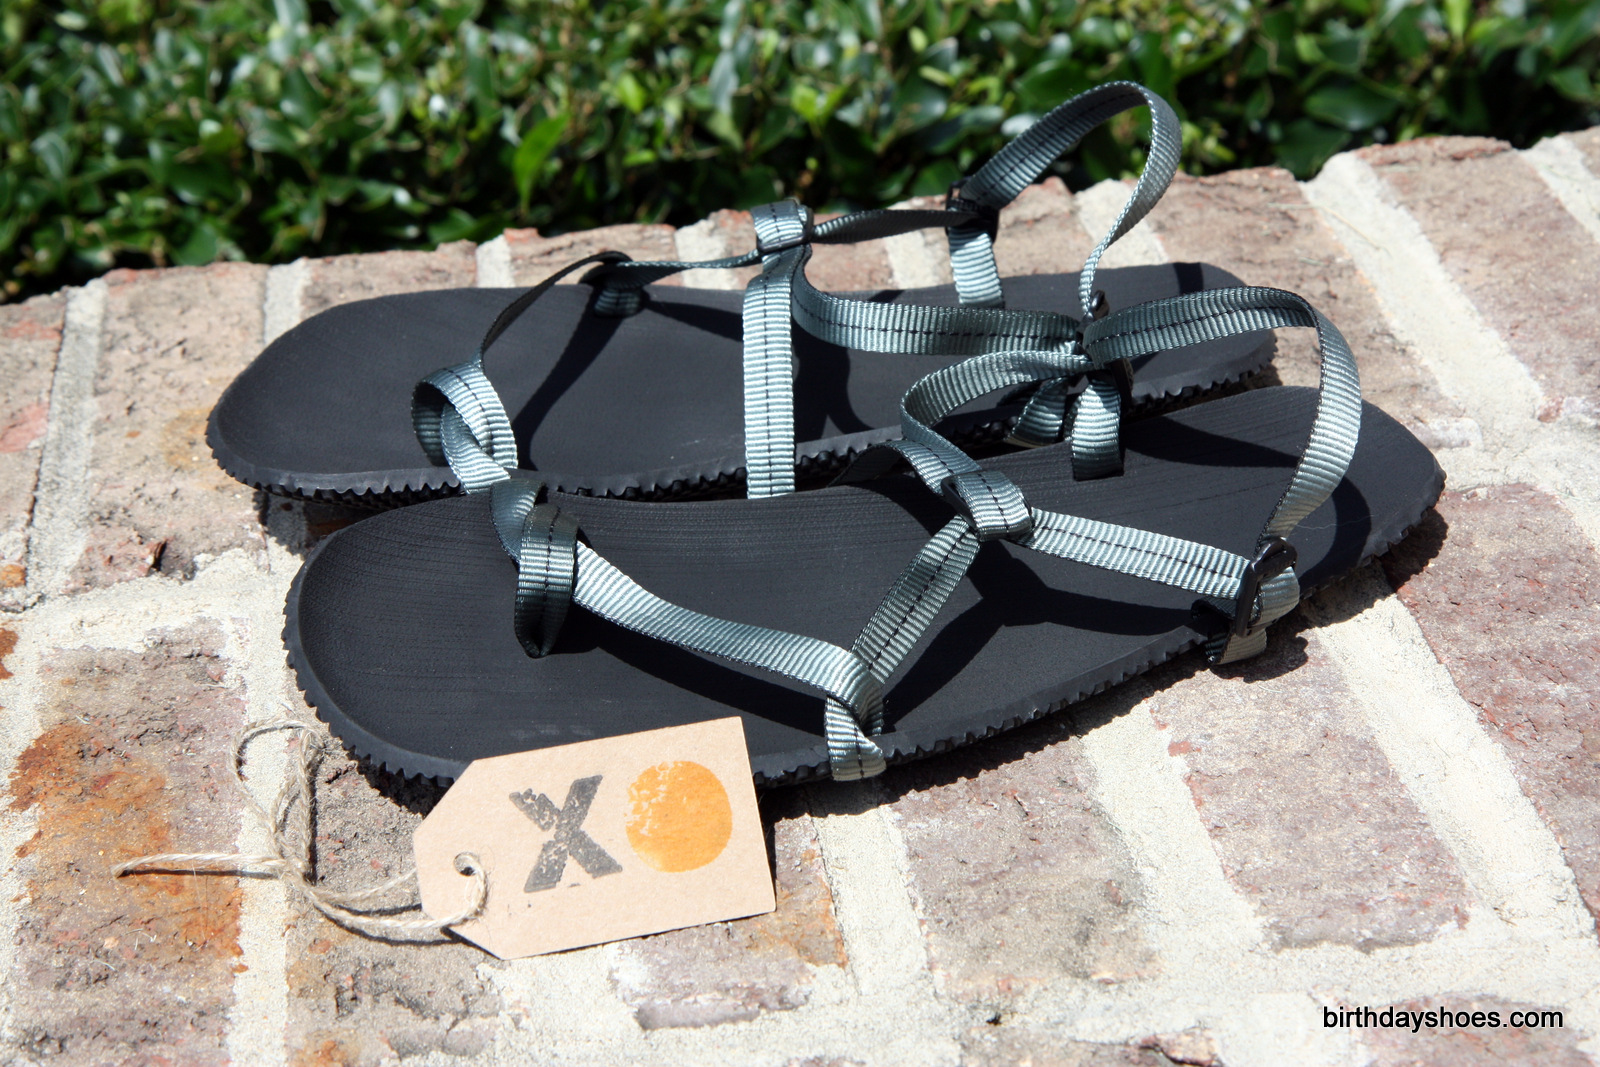 Seen above are the Exodus Sandals with the "foliage" straps.